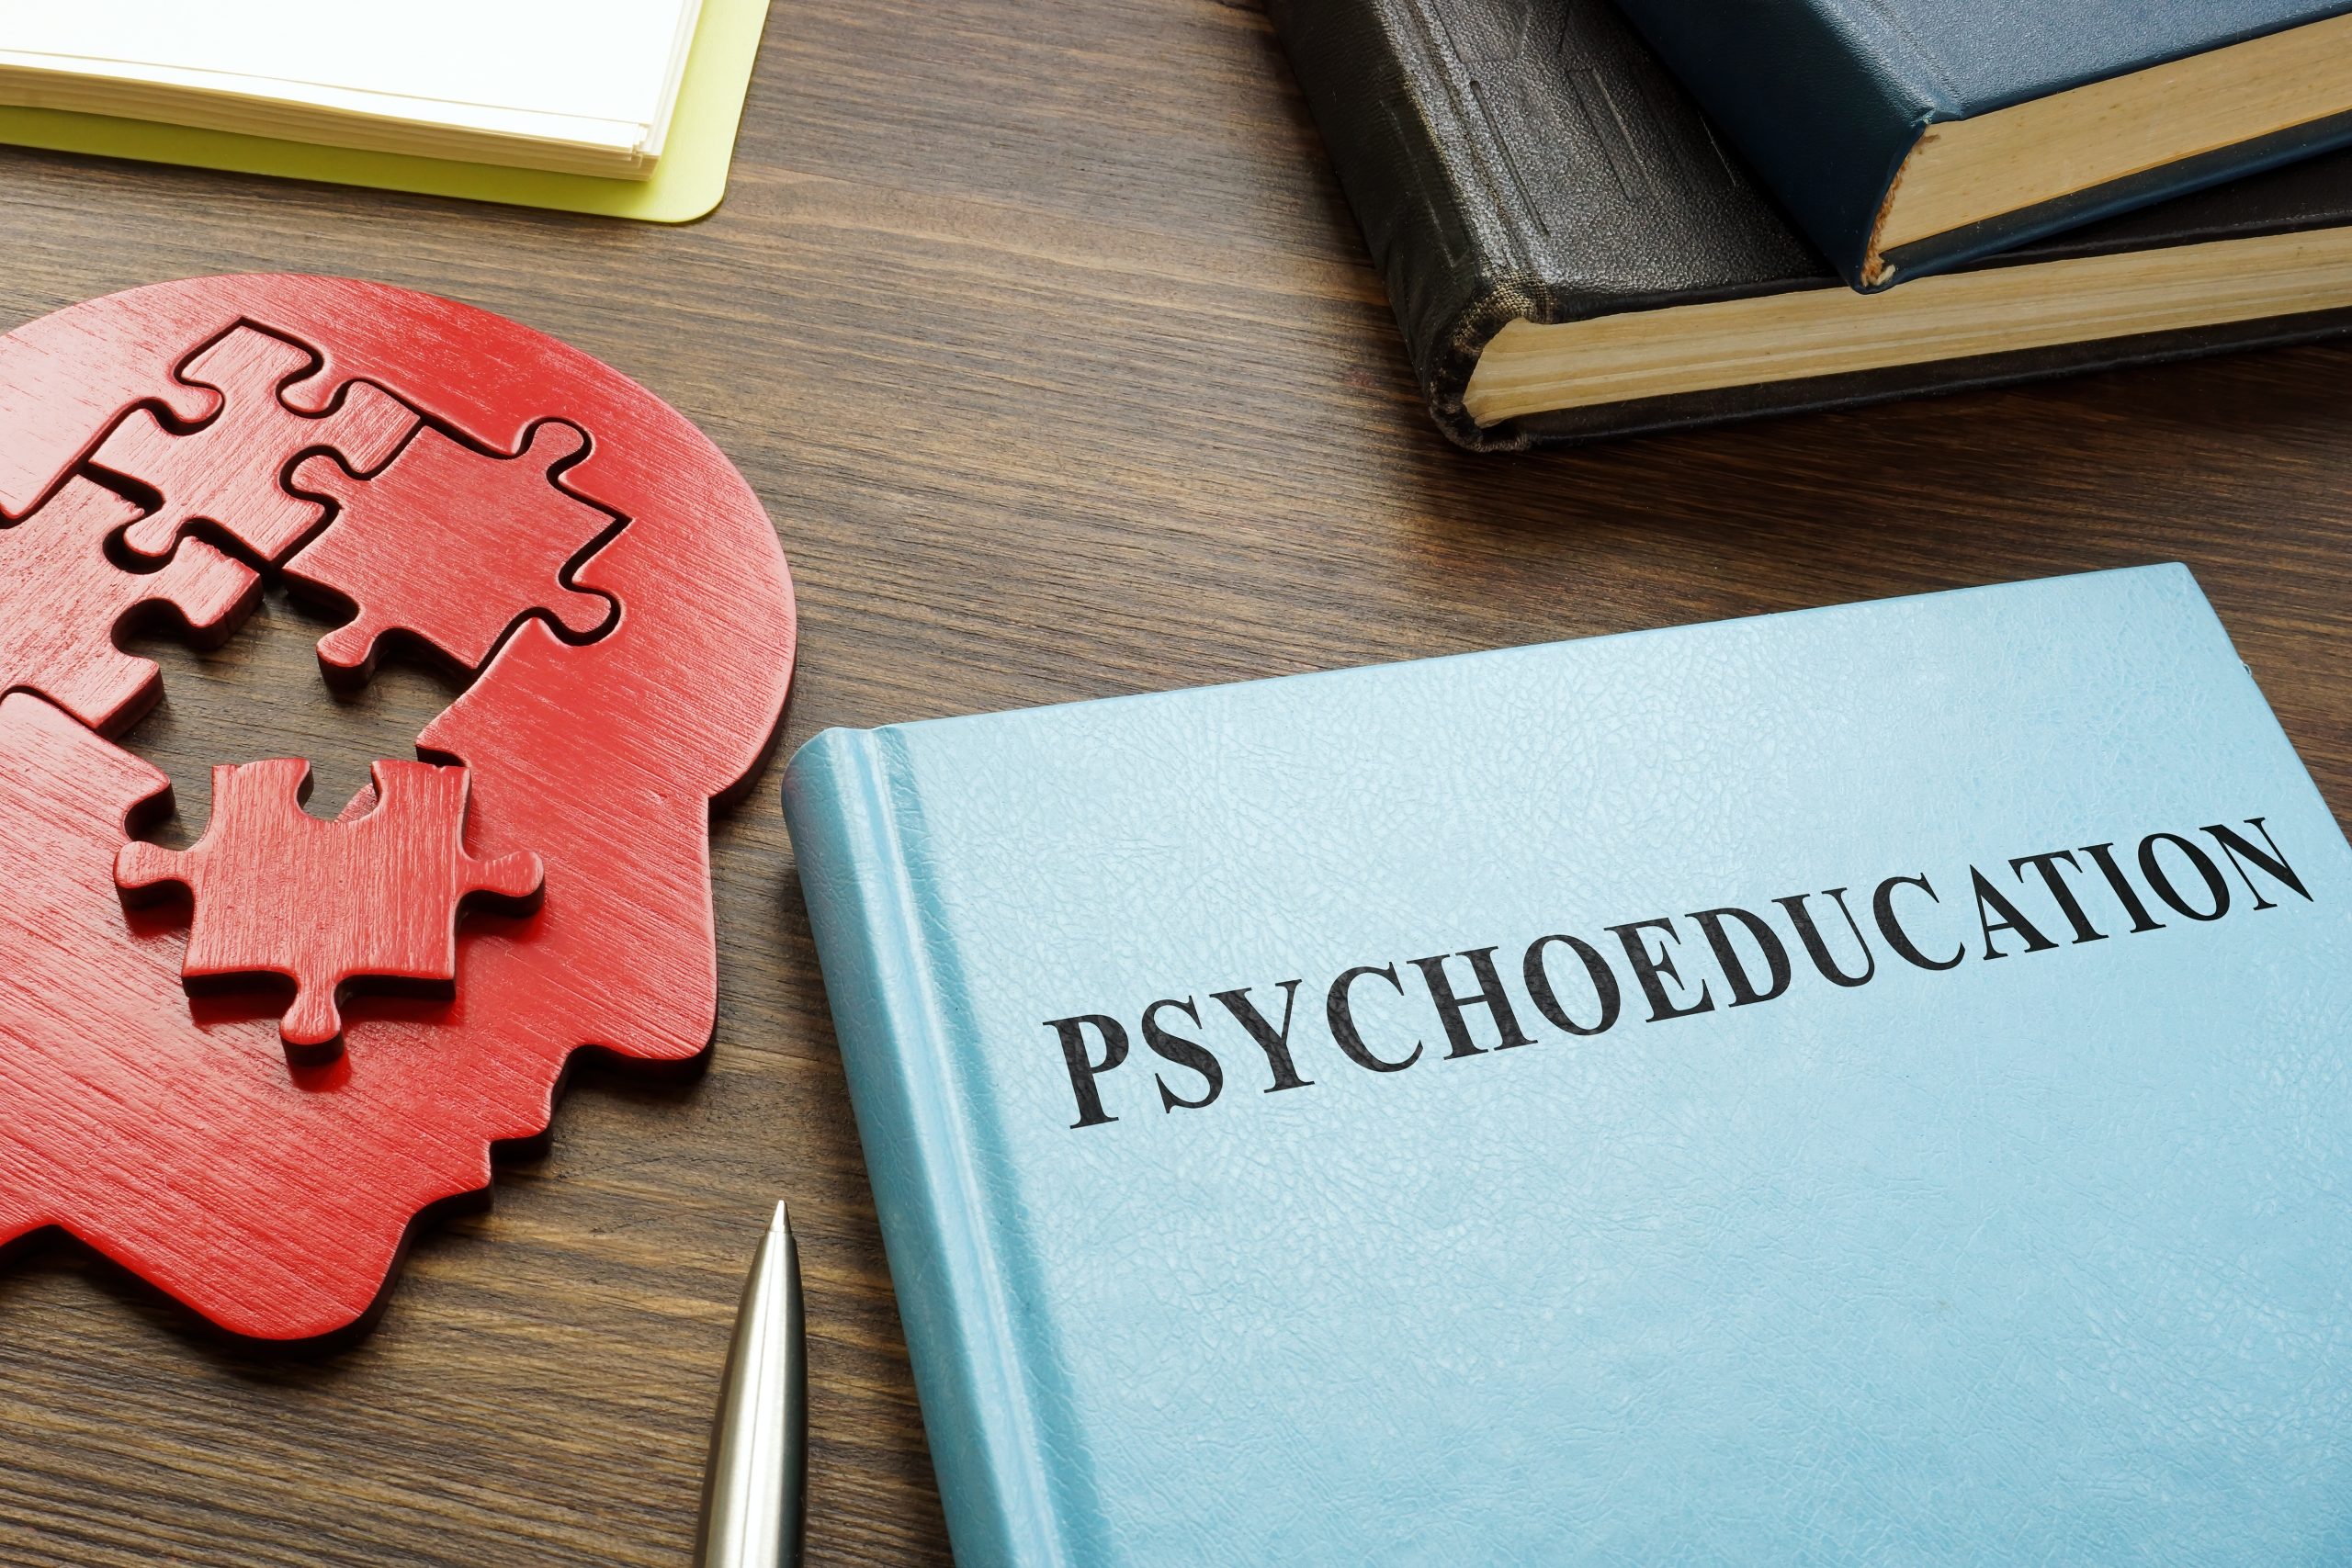 image showing a book titled 'Psychoeducation' next to a wooden head with jigsaw puzzle pieces inside, highlighting resources for education, training, and support tailored for individuals and families affected by severe mental illness